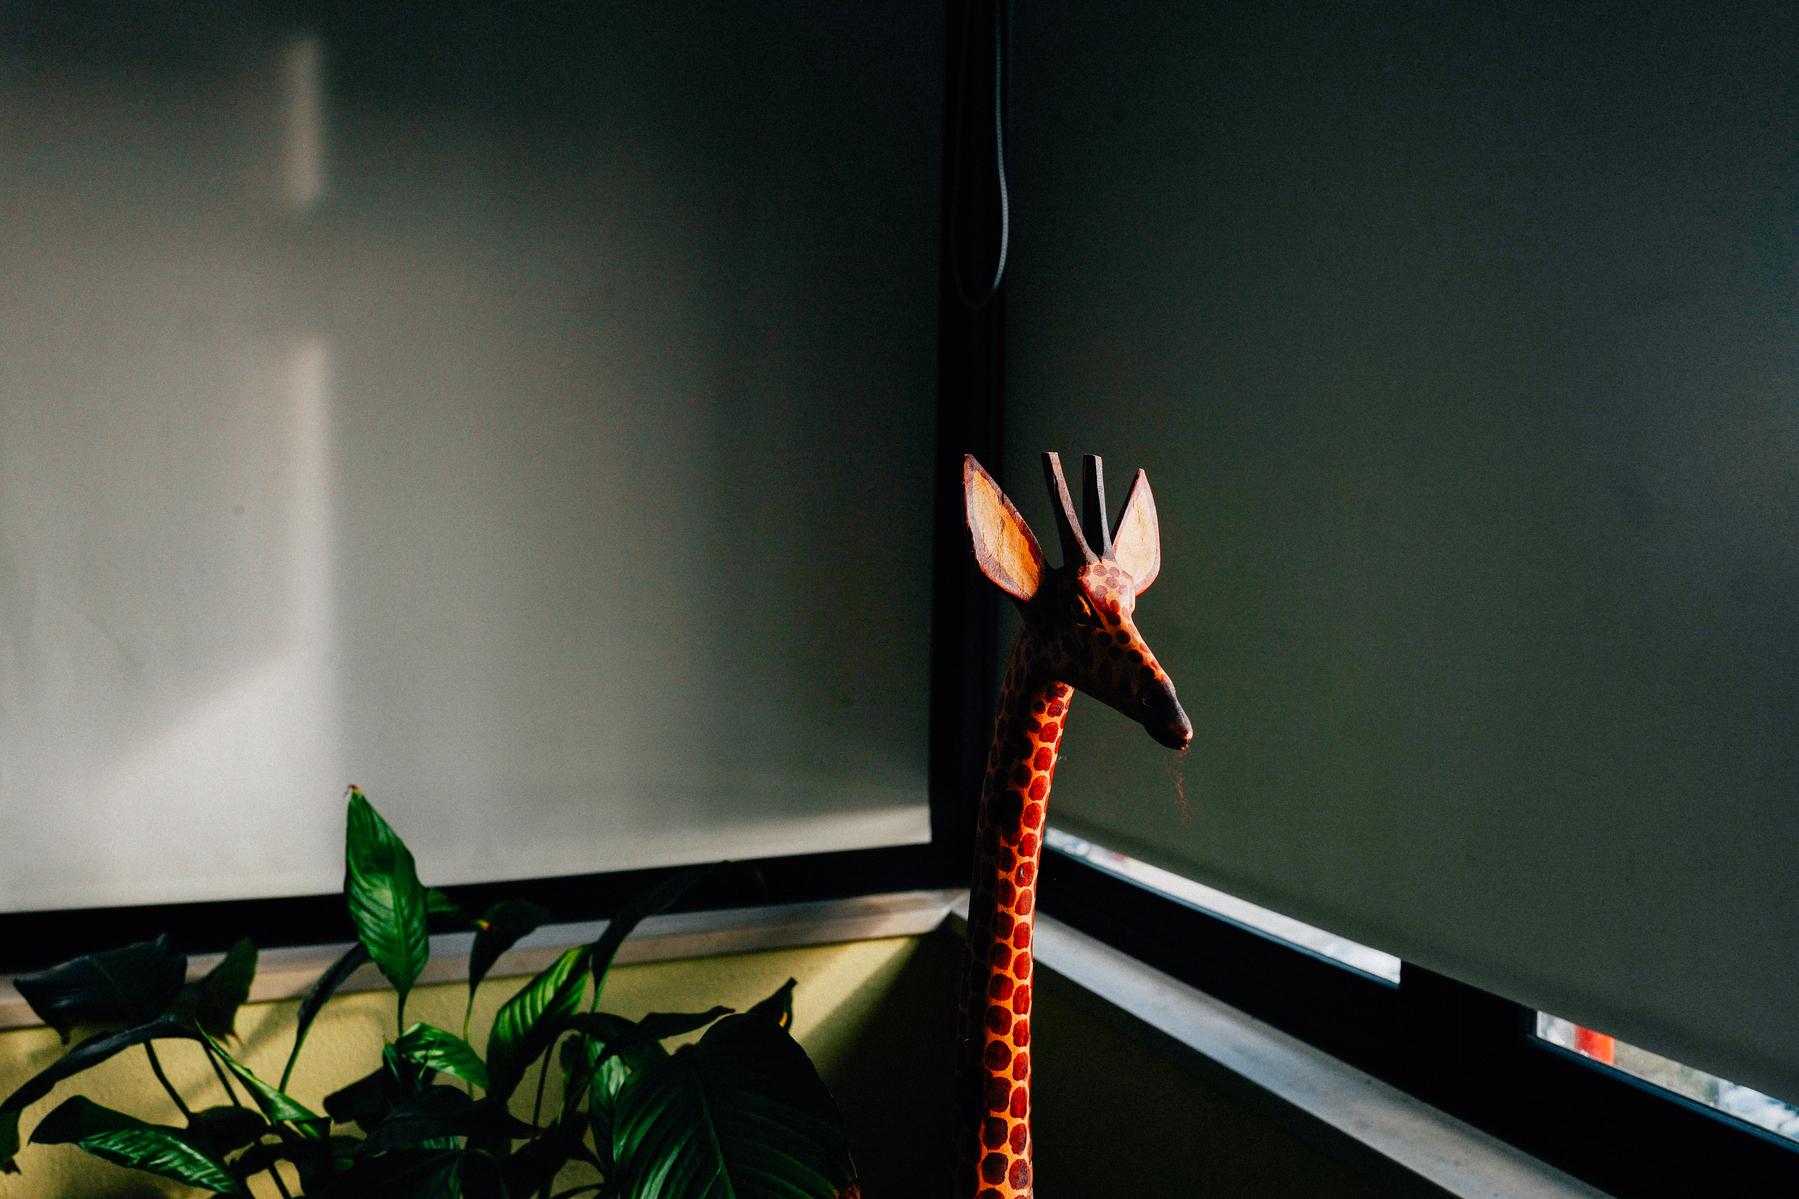 A wooden giraffe figurine stands near a window, partially illuminated by sunlight, with houseplants in the foreground and a dark grey wall in the background.